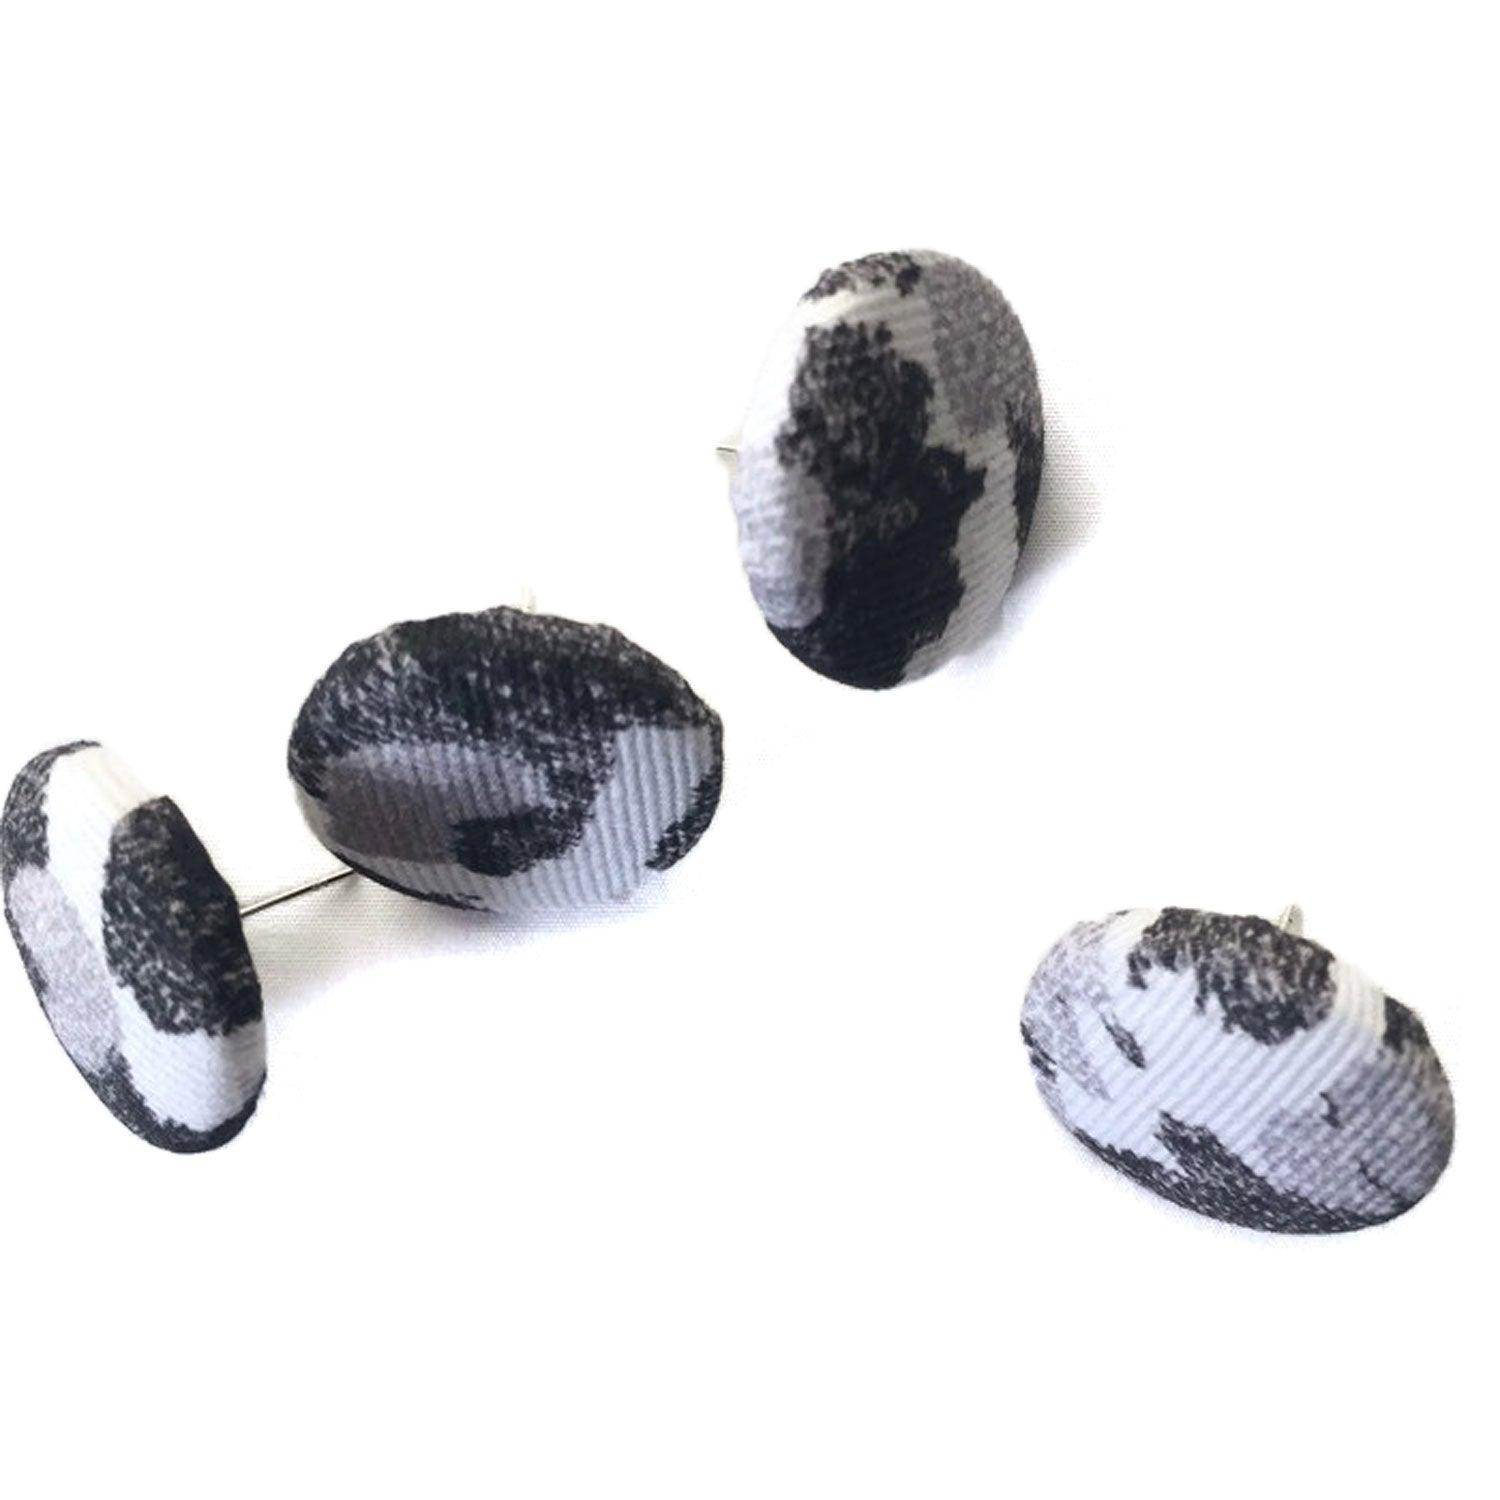 Fabric Covered Button Earrings With Torto B&W Pattern - OlaOla